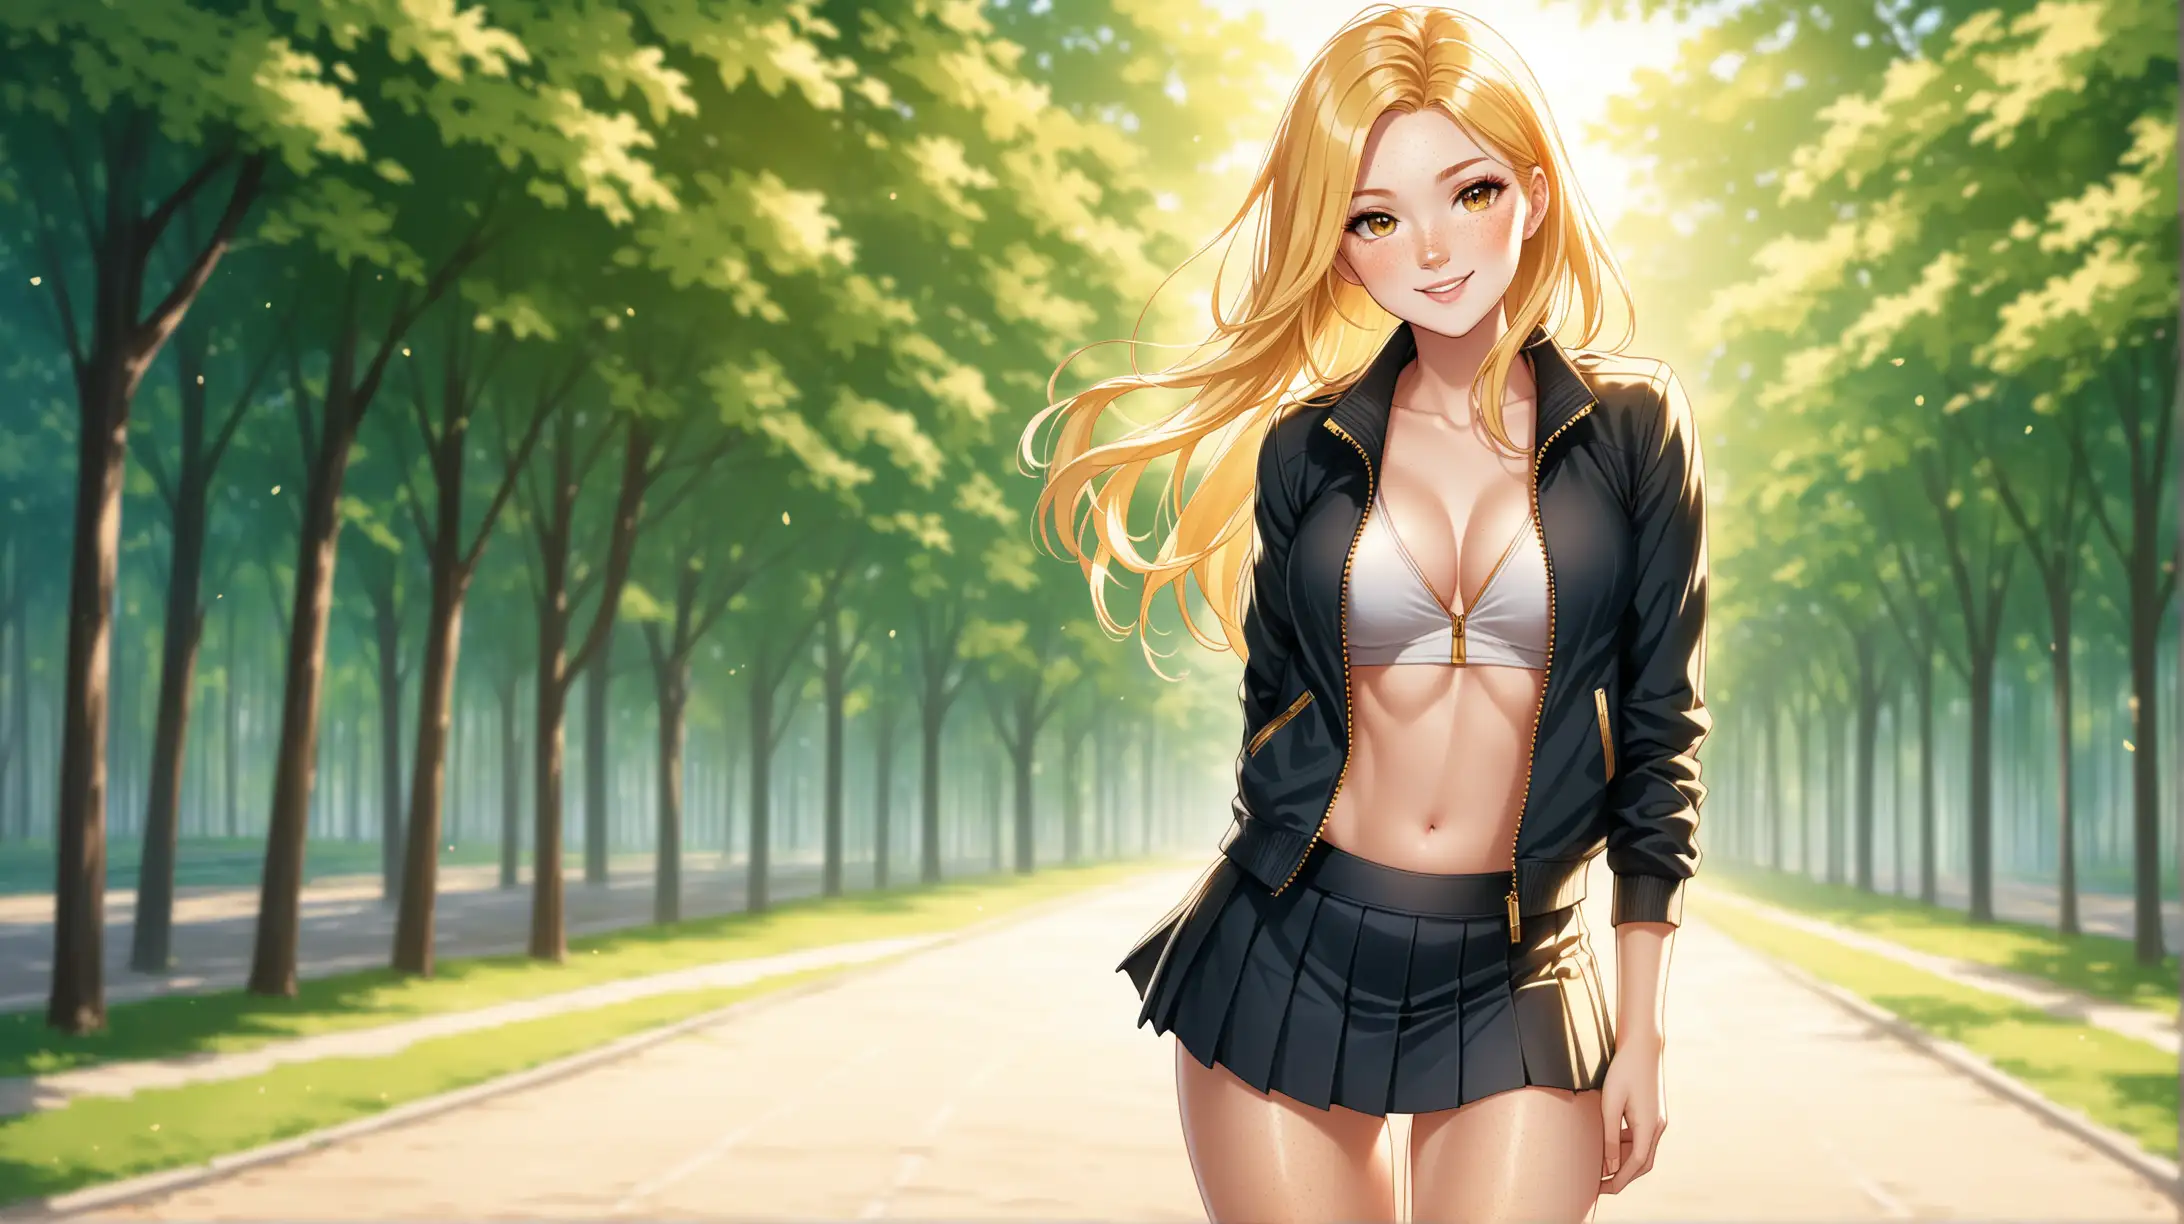 Draw a woman, long blonde hair, gold eyes, freckles, perky figure, unzipped jacket, pleated skirt, high quality, long shot, natural lighting, outdoors, seductive pose, smiling toward the viewer